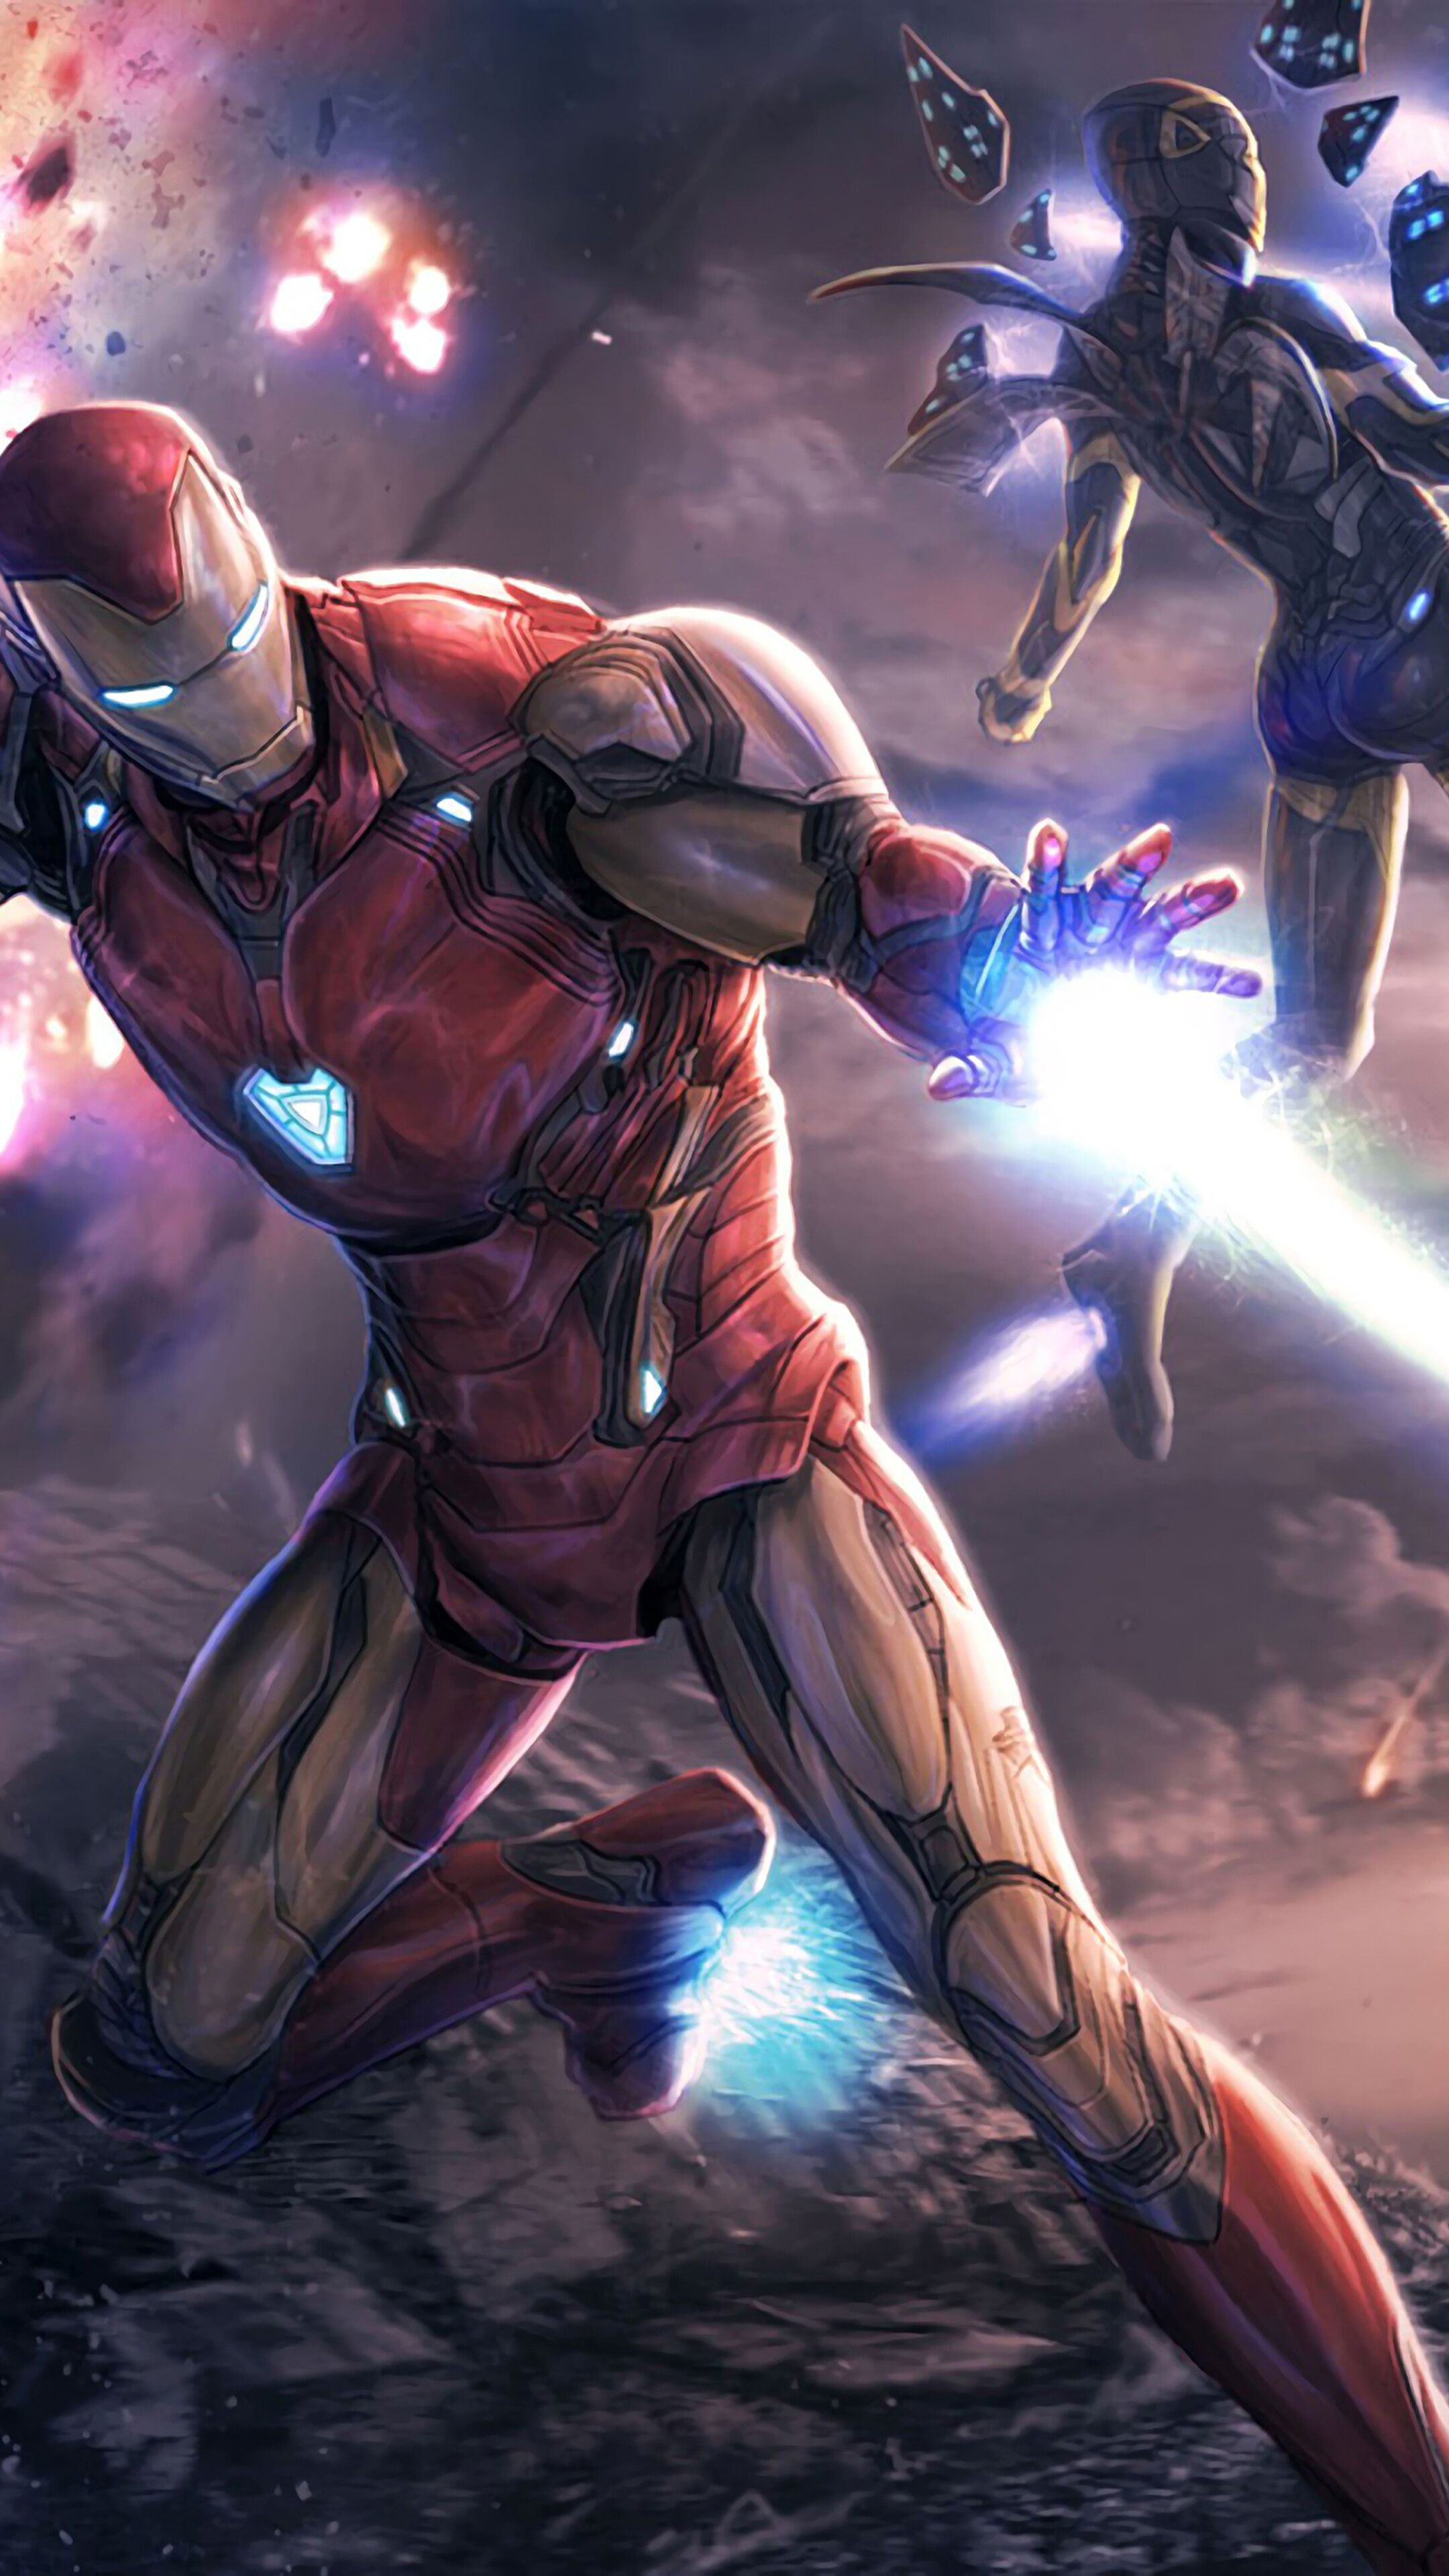 Iron Man, Iron Rescue, Avengers Endgame, 4K iPhone 6s, 6 HD Wallpaper, Image, Background, Photo and Pic. Iron man poster, Iron man wallpaper, Iron man art